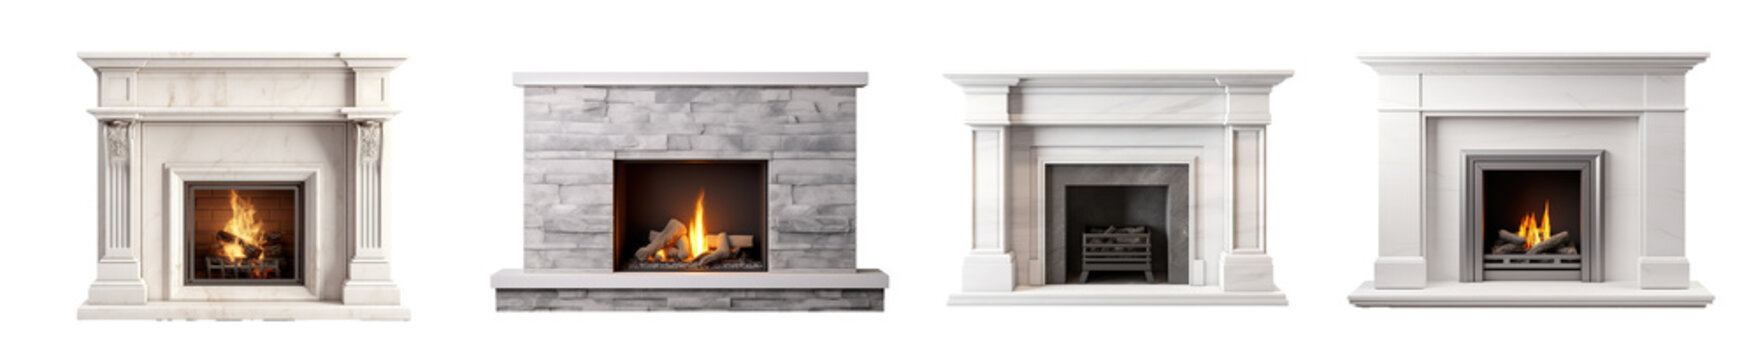 fireplace modern, classic and stone style.  beautiful lit fireplaces surrounded by modern tile. isolated on transparent background